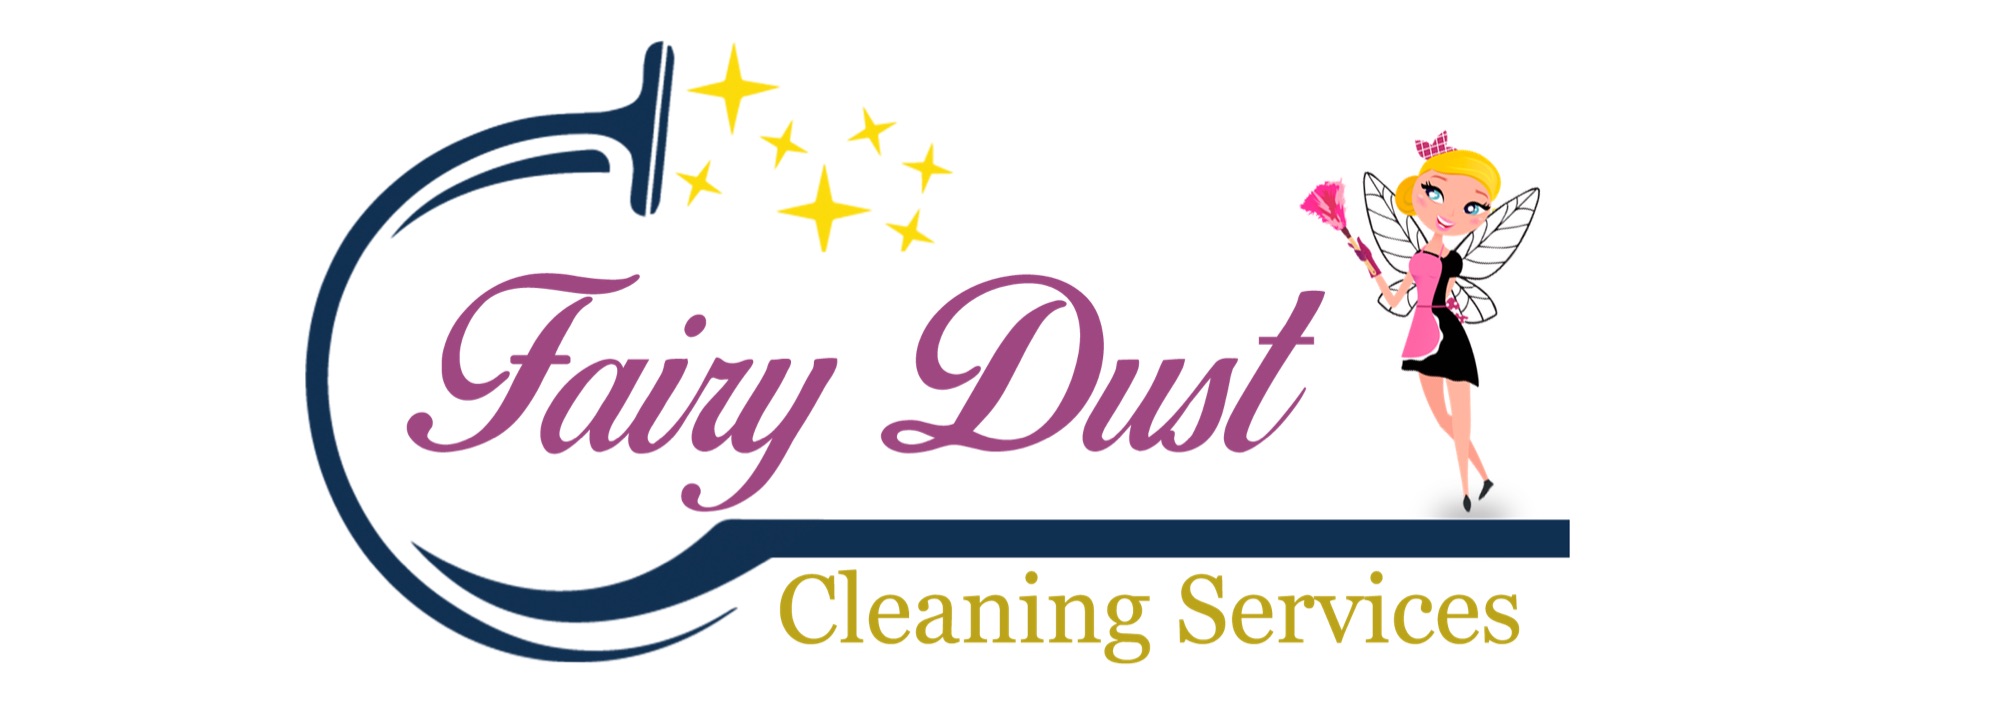 Fairy Dust Cleaning Services Logo